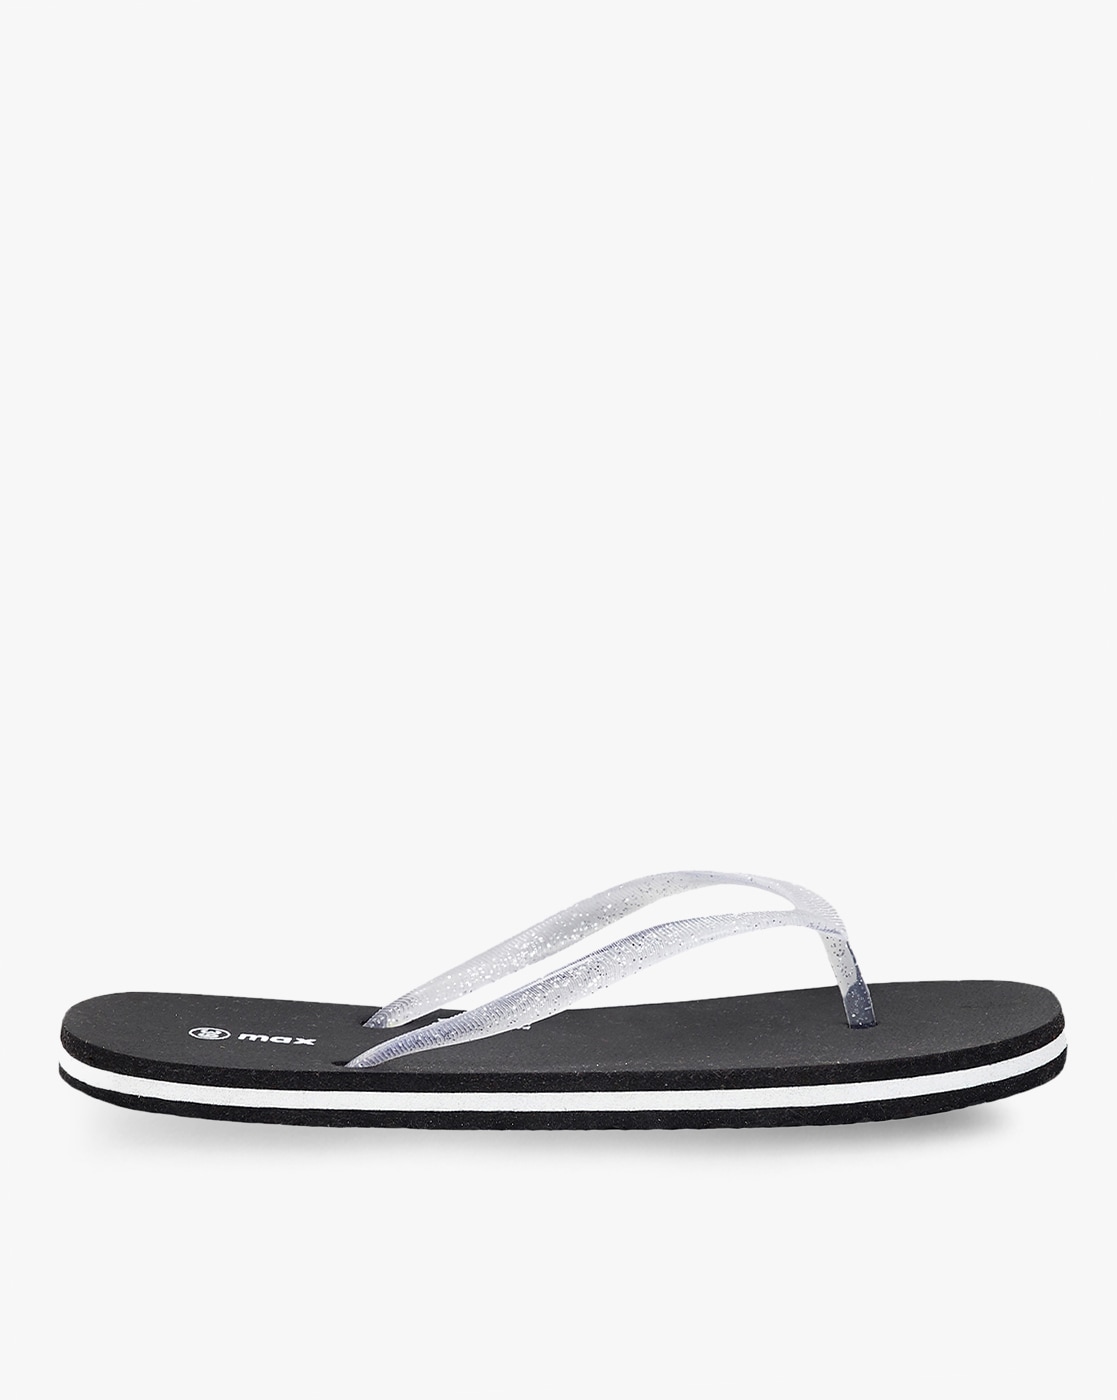 Buy Black Flip Flop & Slippers for Women by MAX Online